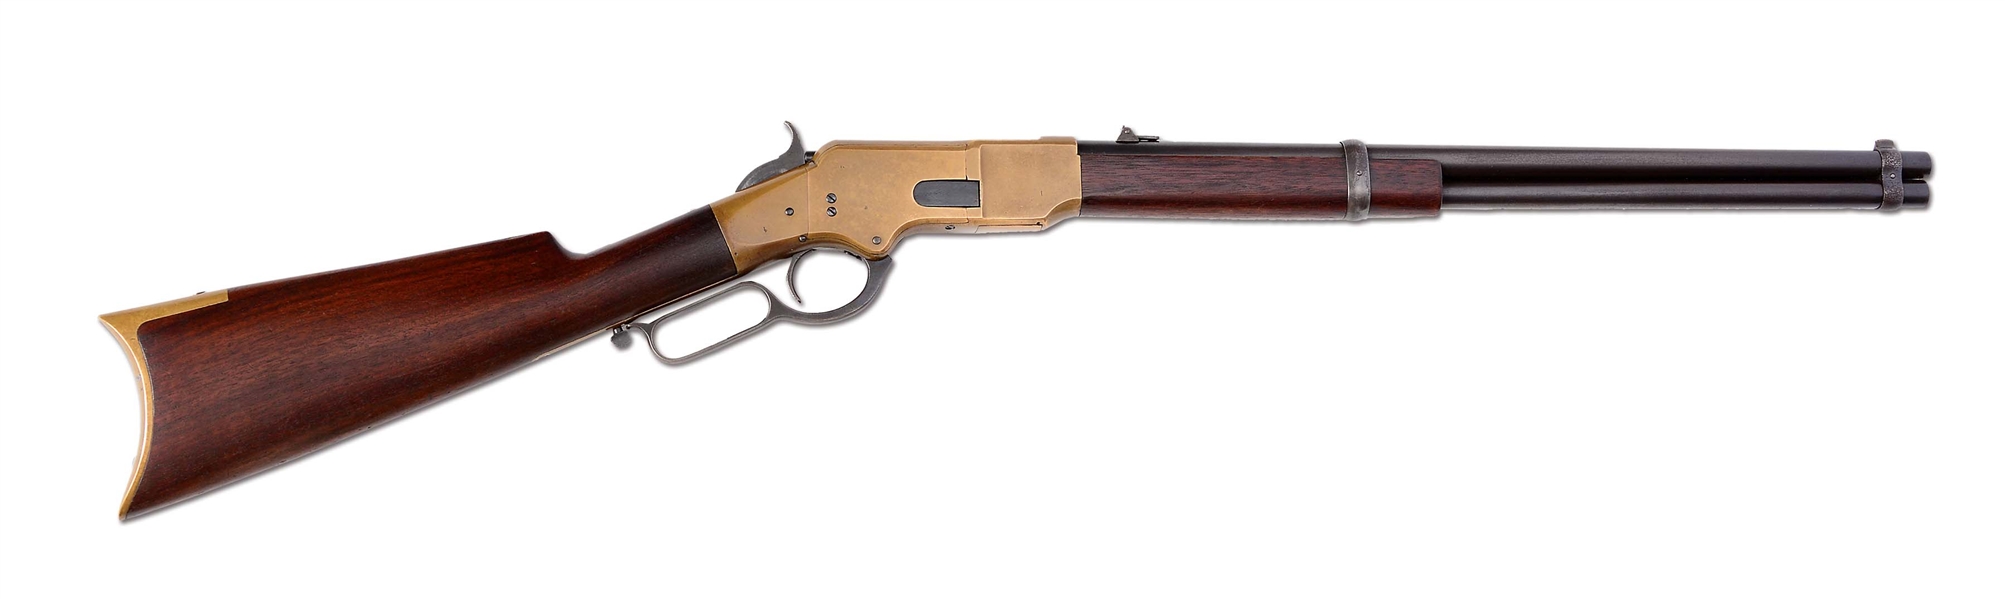 (A) EXCEEDINGLY RARE & DESIRABLE FLATSIDE WINCHESTER 1866 SADDLE RING CARBINE - 1ST MODEL (1868).